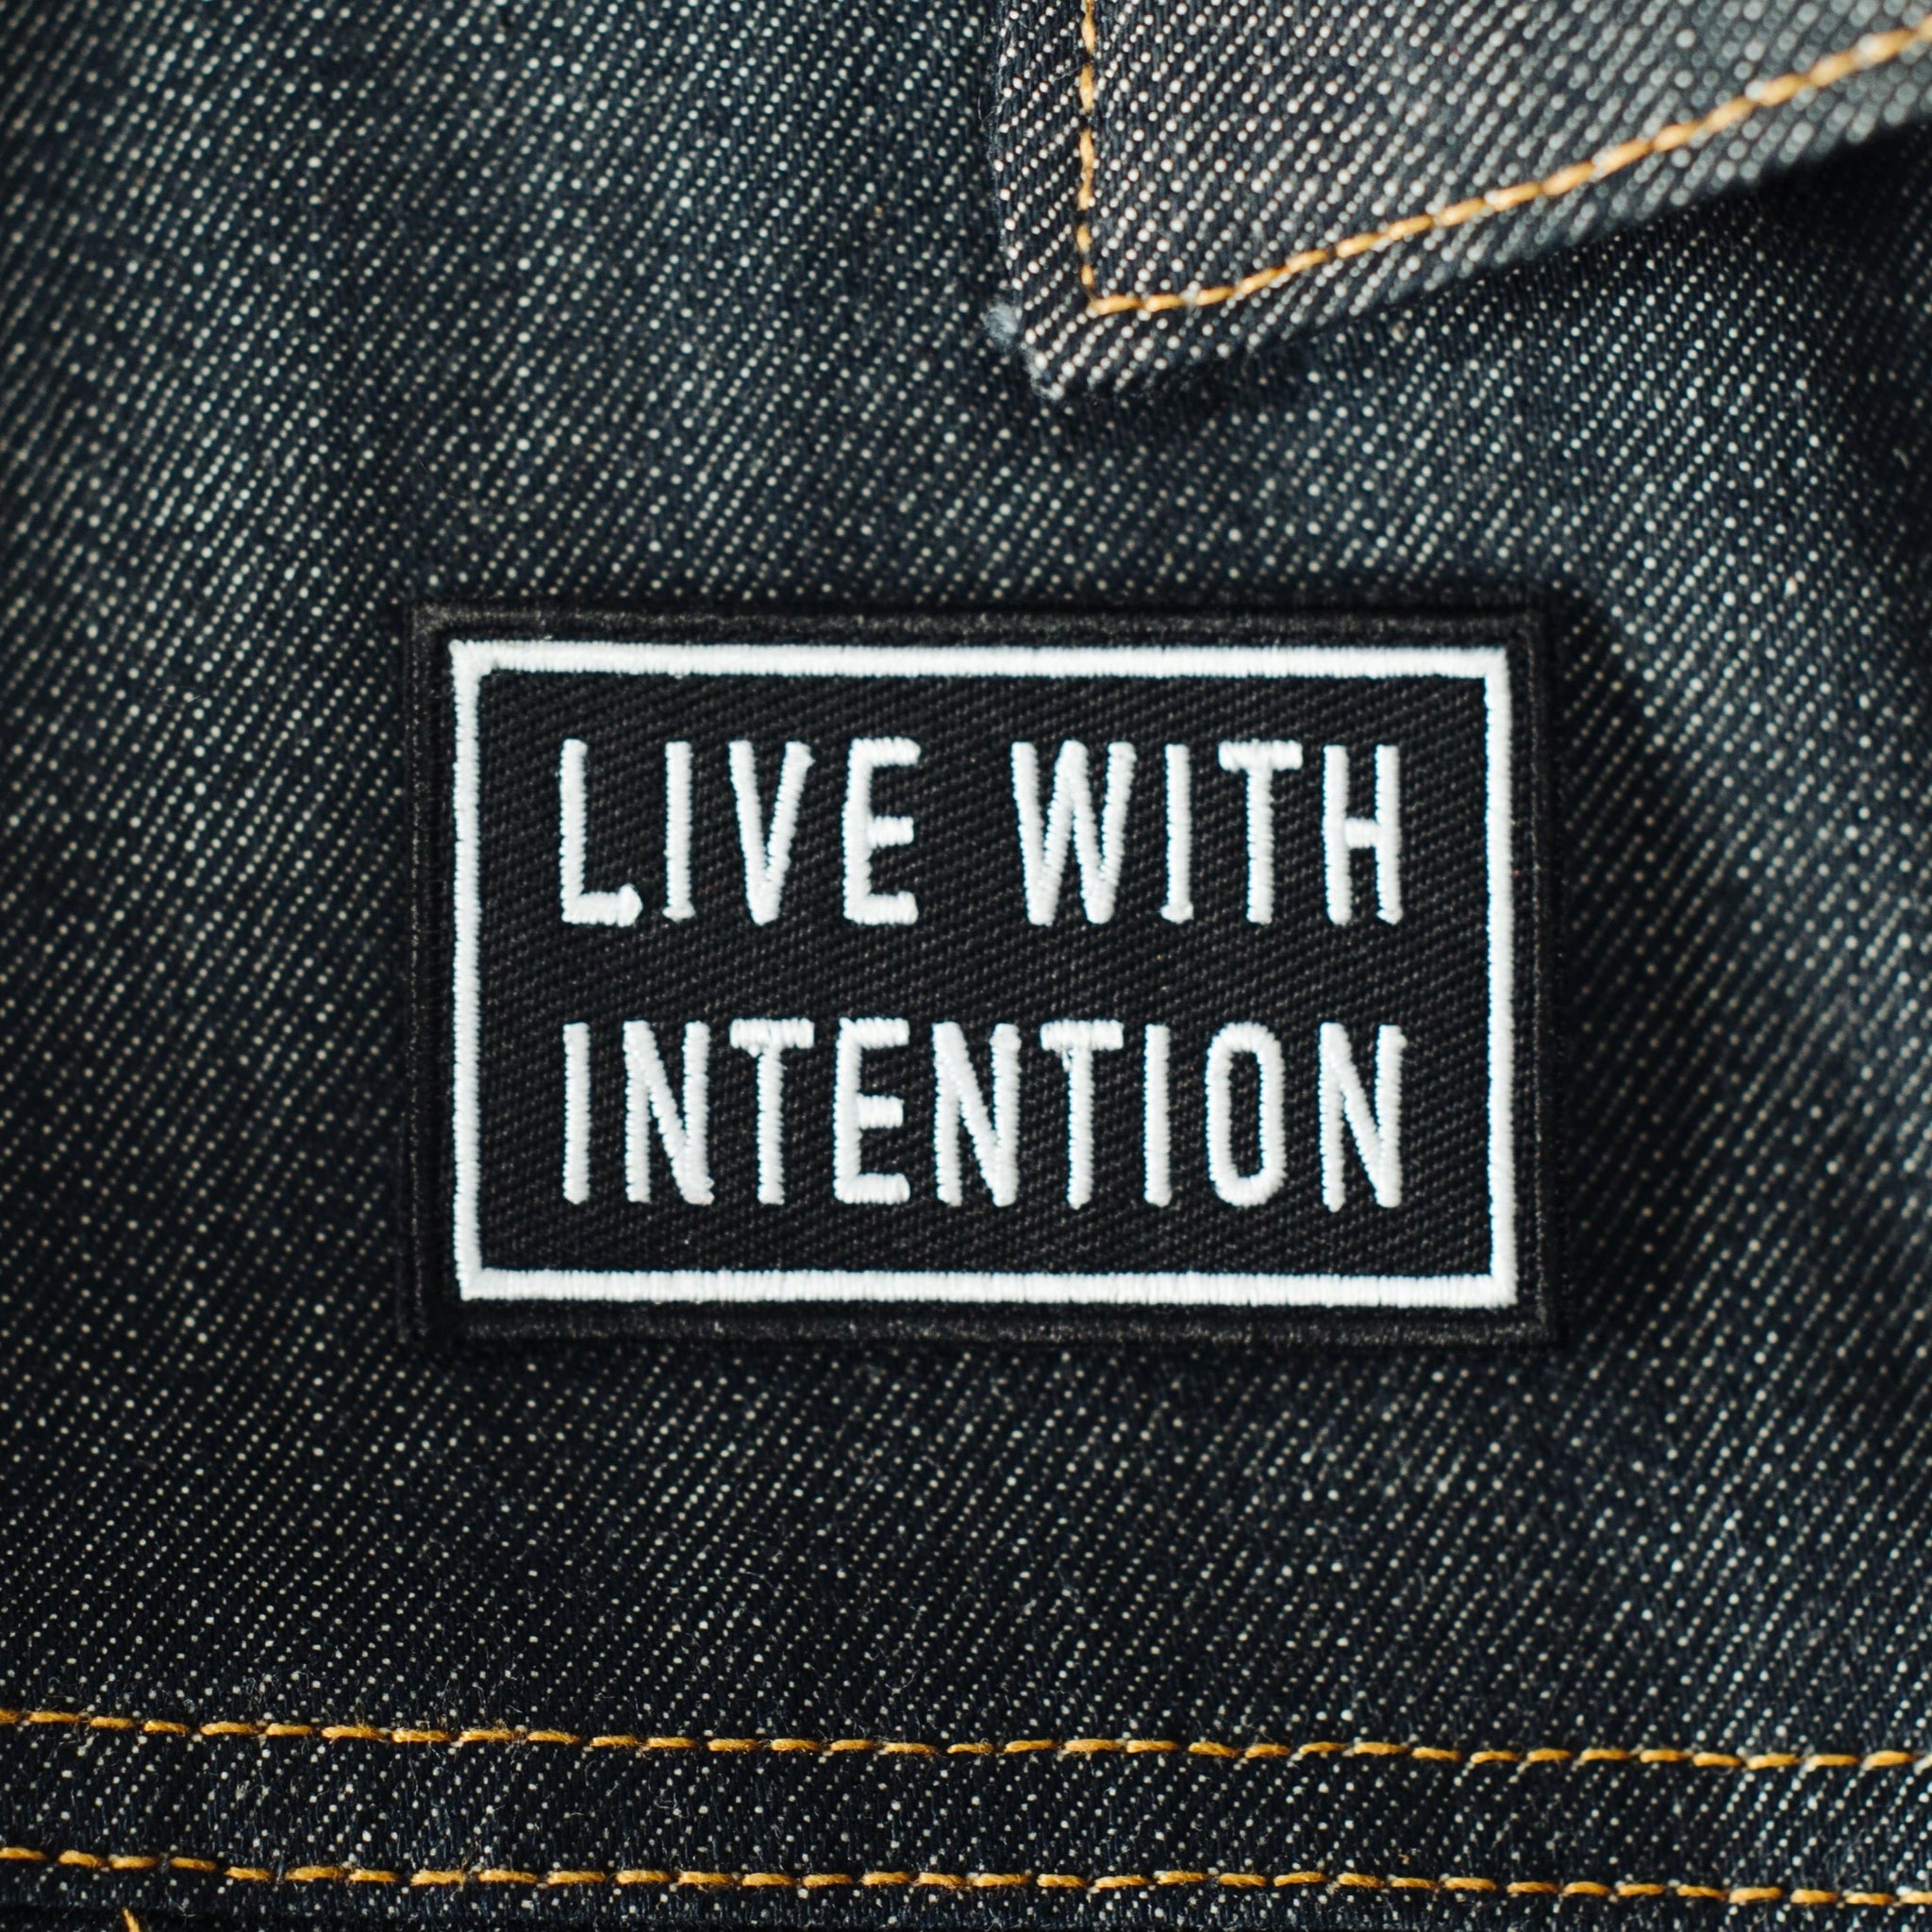 Live with Intention iron on embroidered patch on denim blue jean jacket